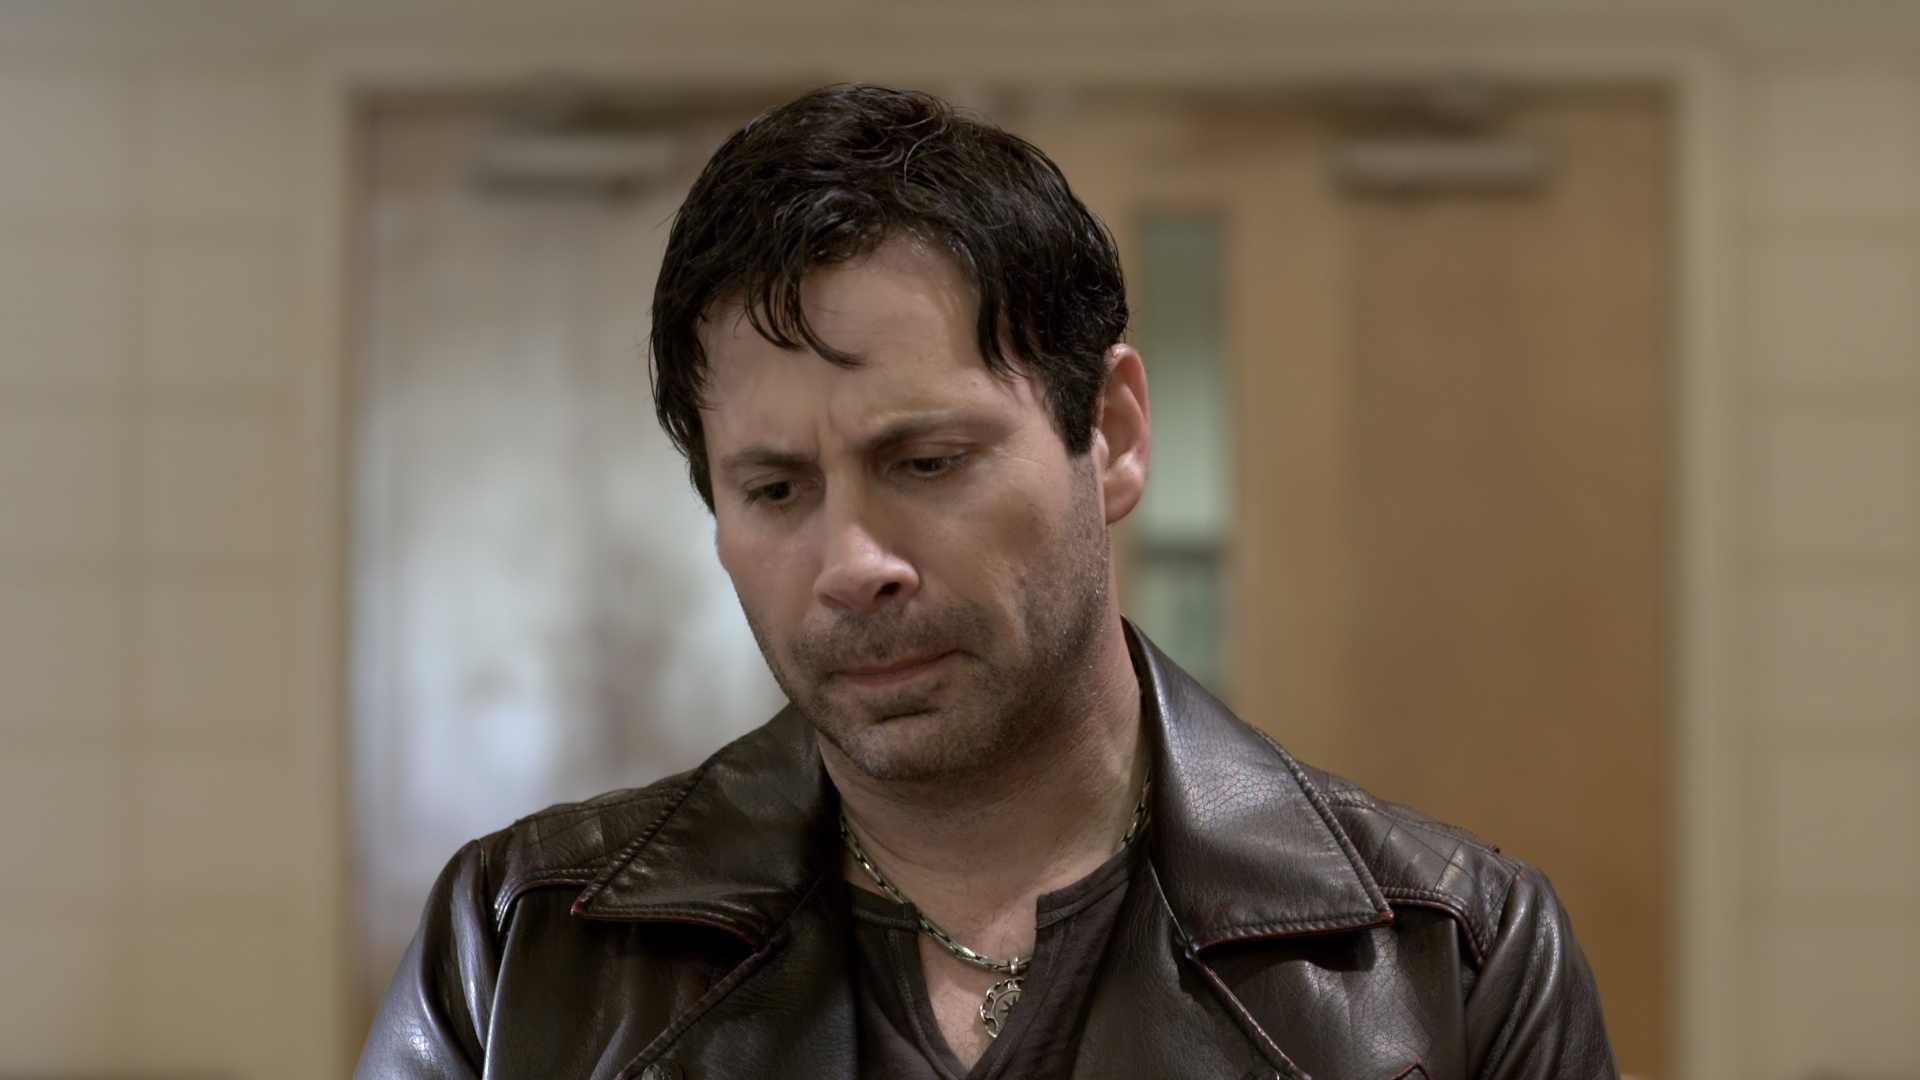 Salvatore Verini as Ethan Cain in Shadowglade.